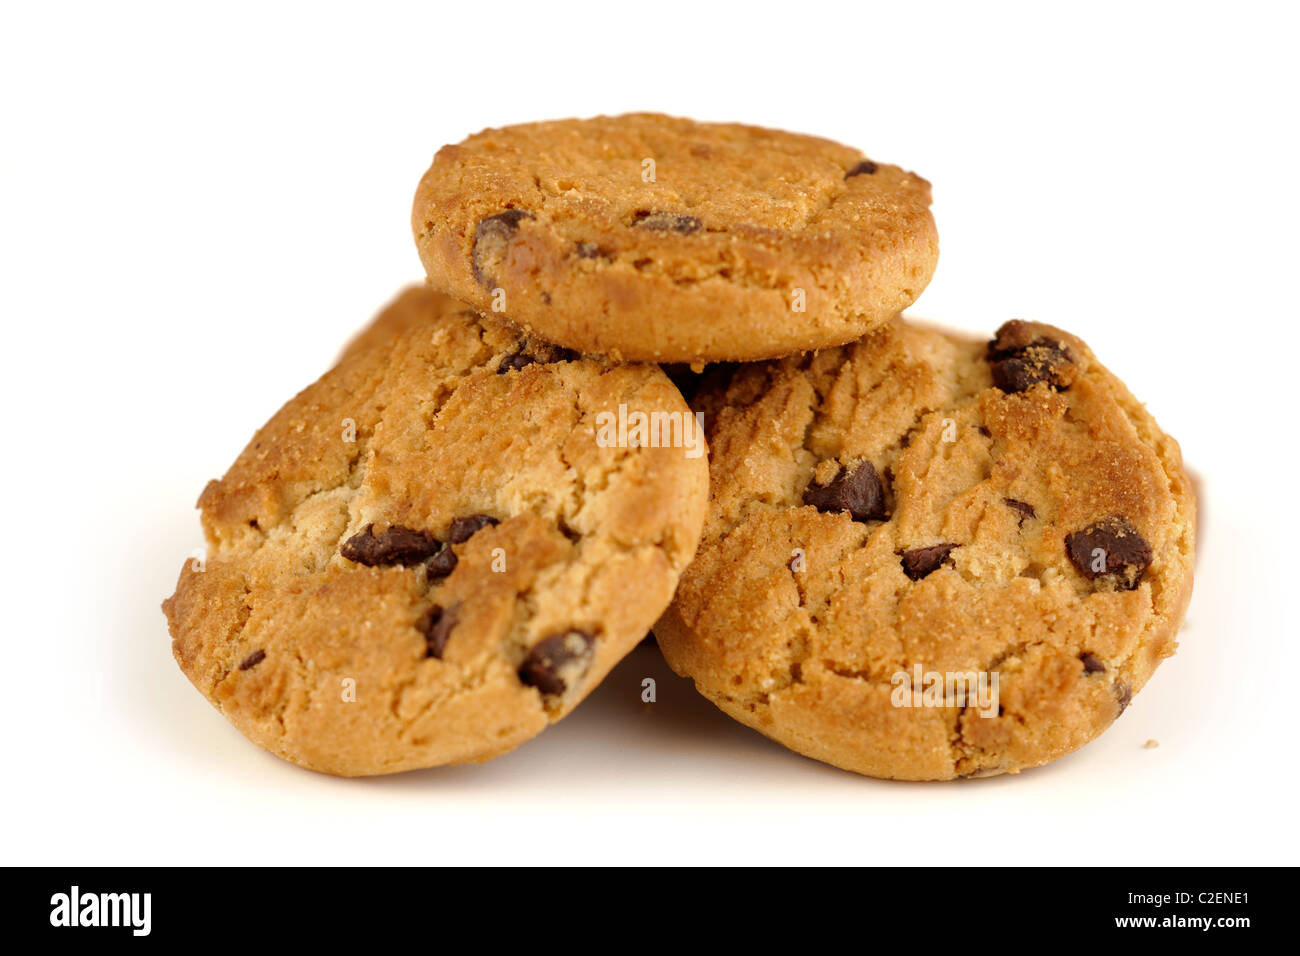 Pile of chocolate chip cookies Stock Photo